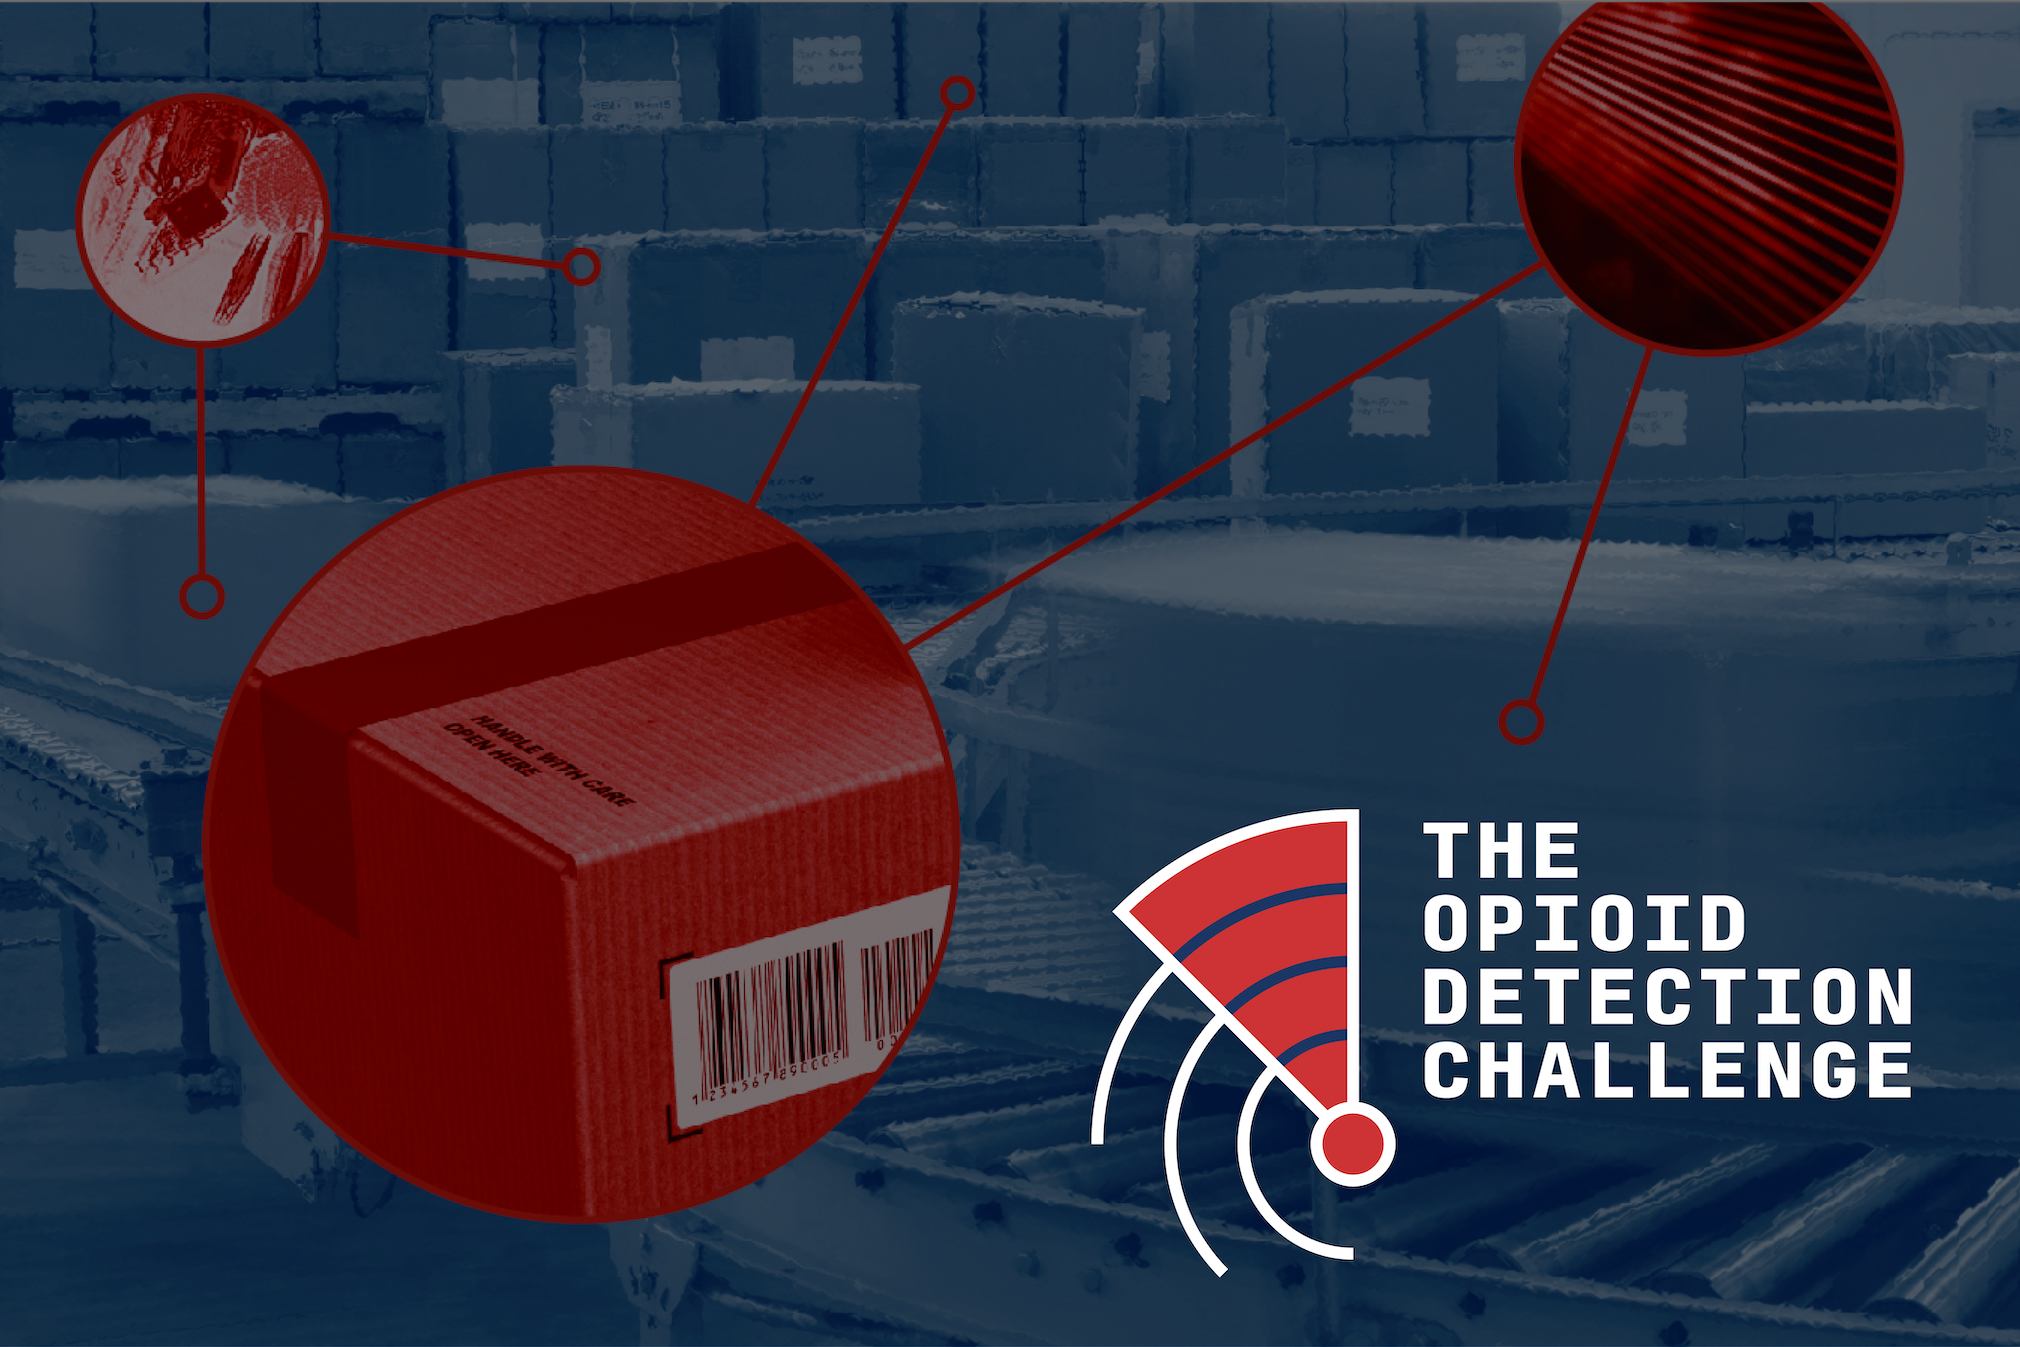 Launched: the $1.55M Opioid Detection Challenge